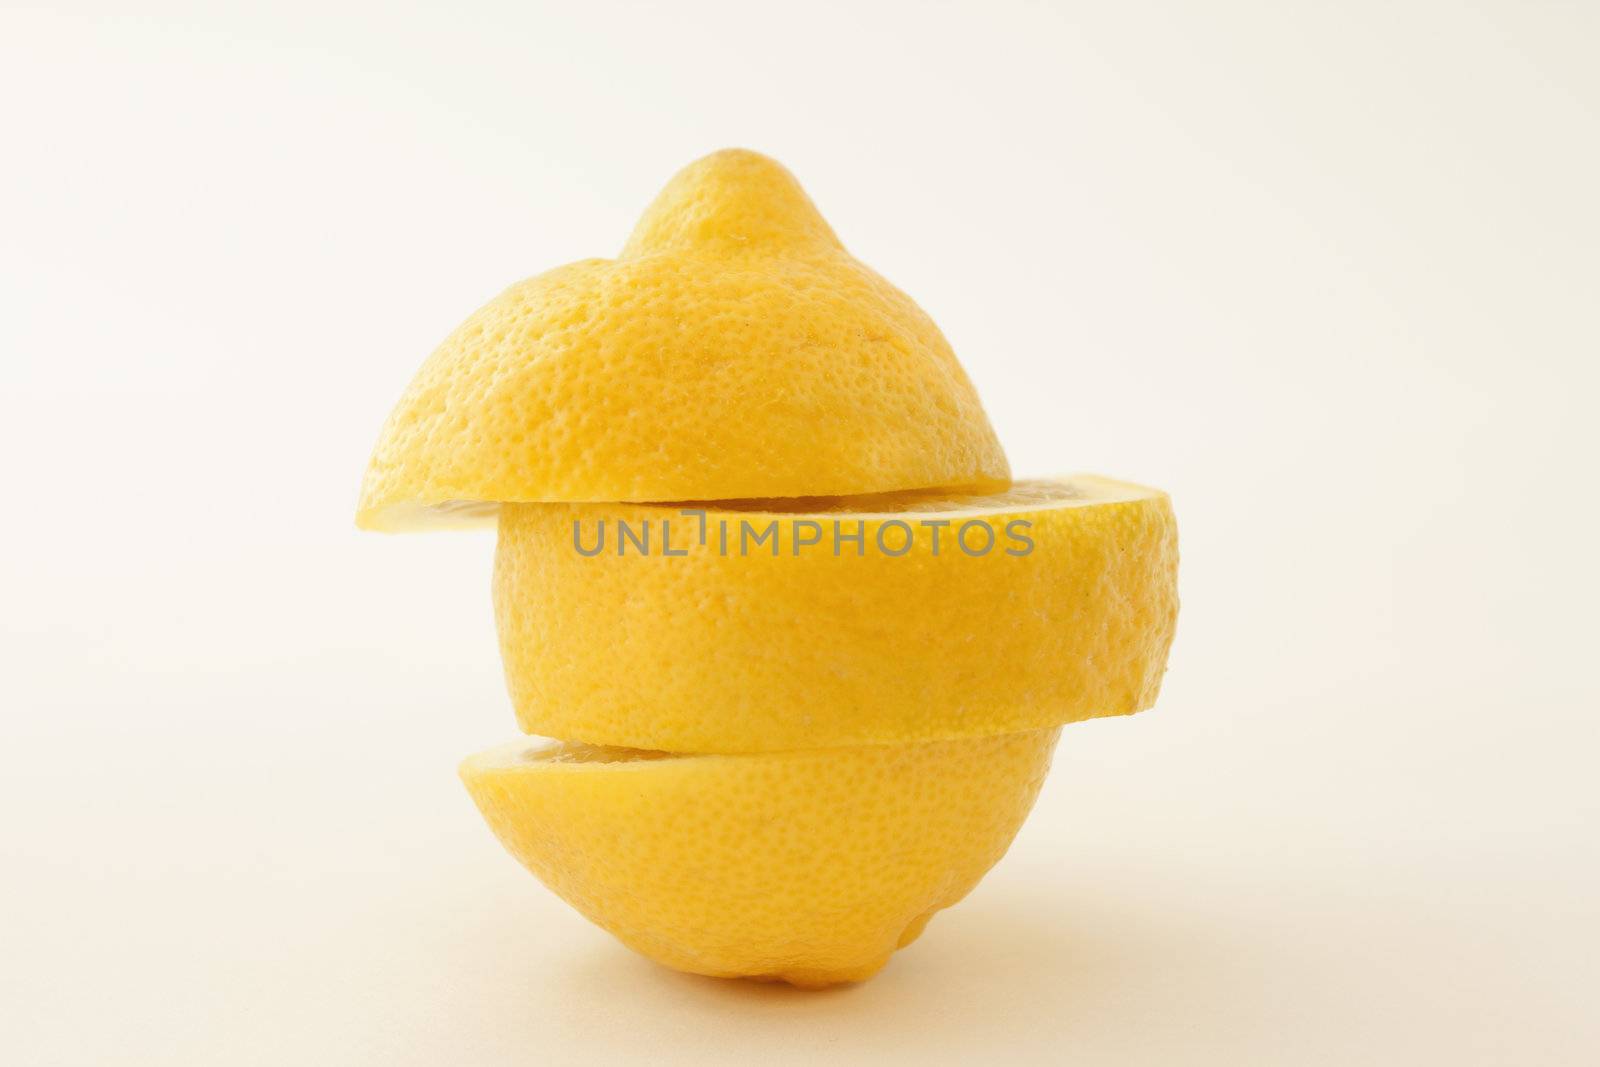 Daring to be different, this lemon balances upright after its unusual slicing